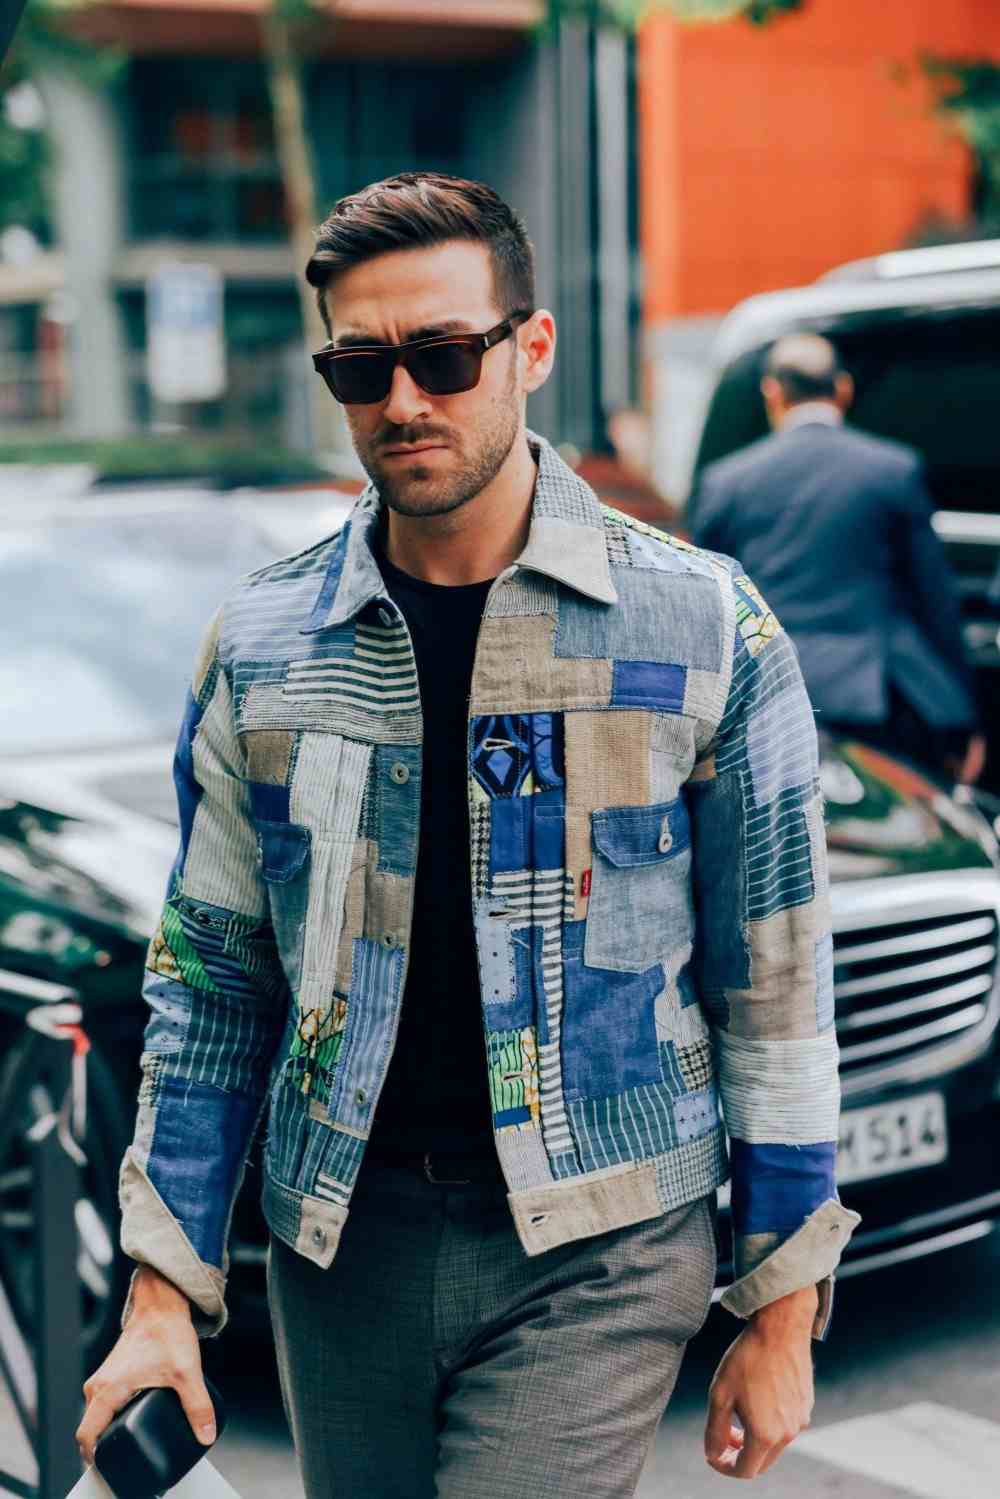 new style for men with short denim jacket of various colors and pieces